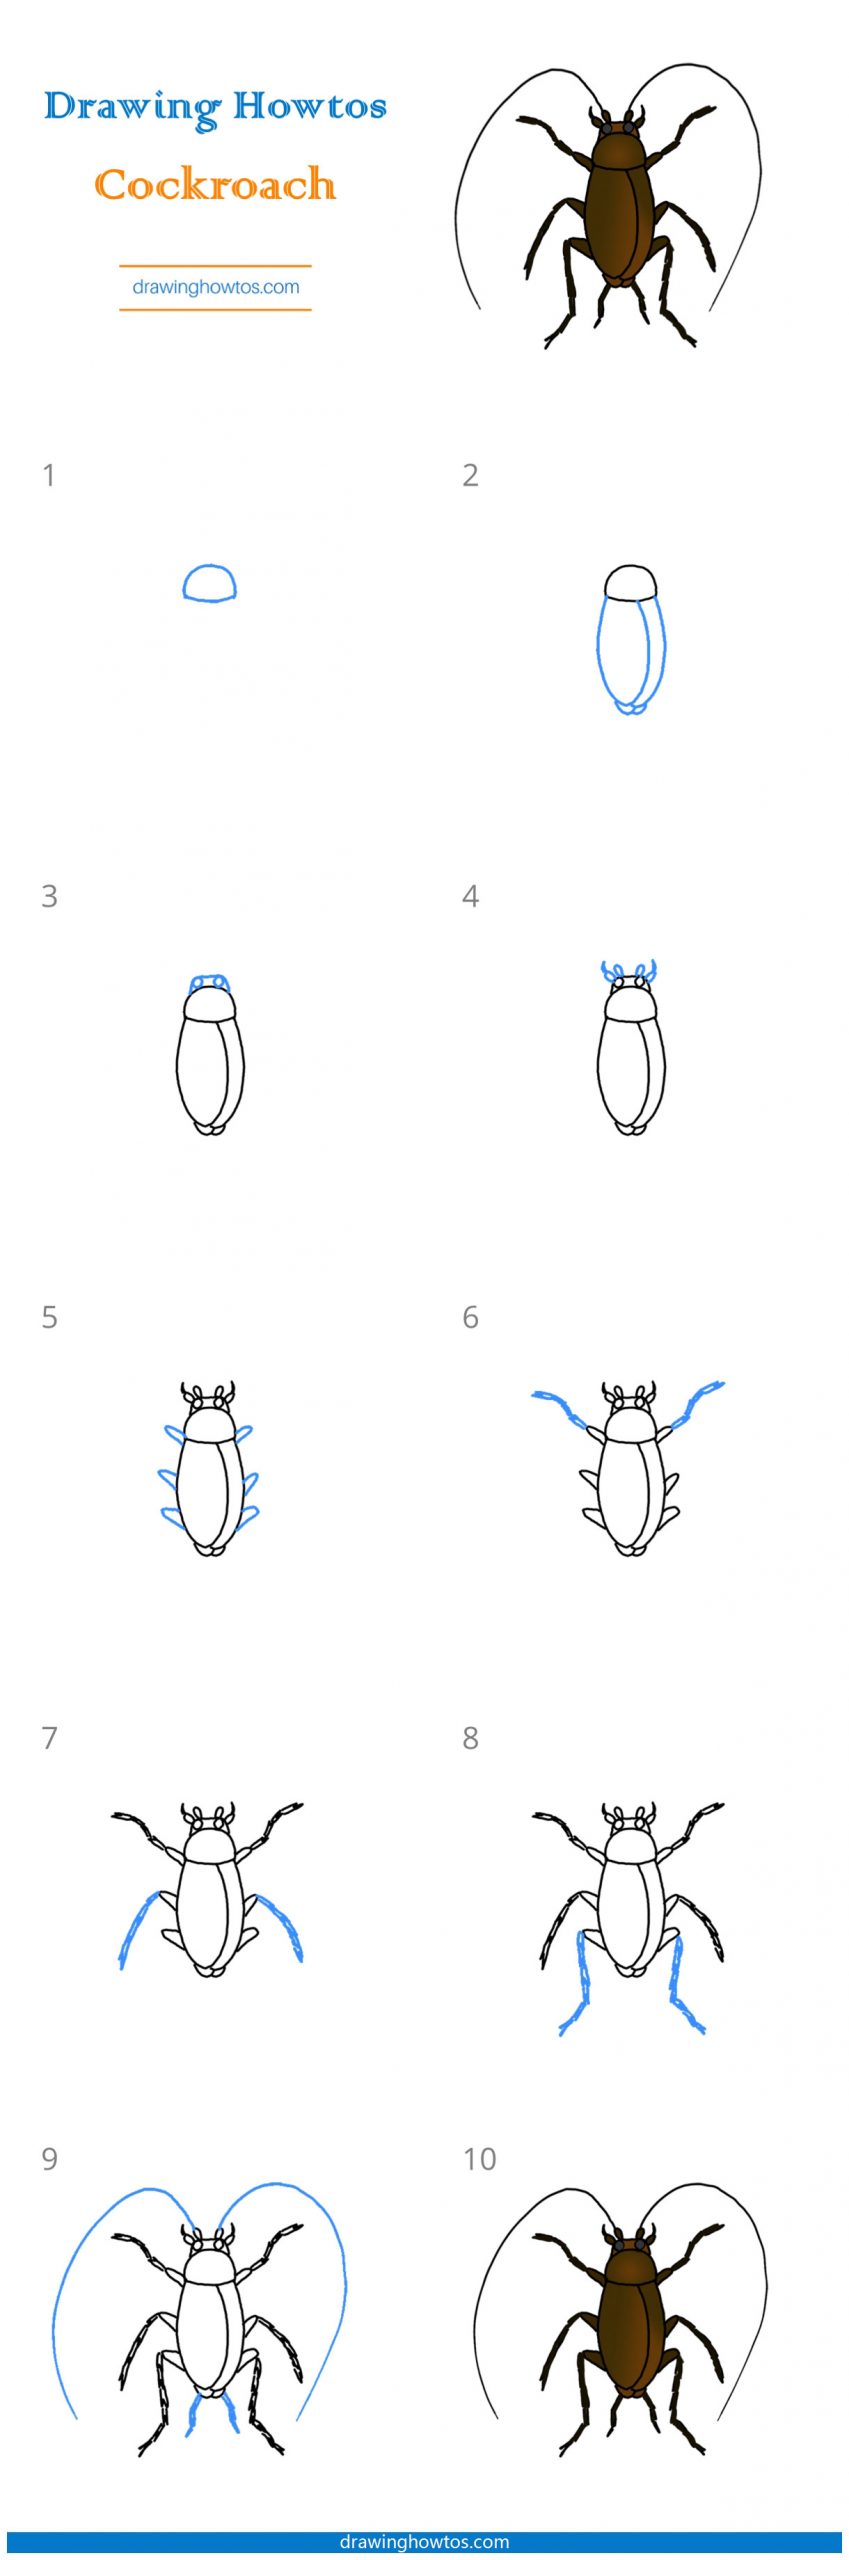 How to Draw a Cockroach Step by Step